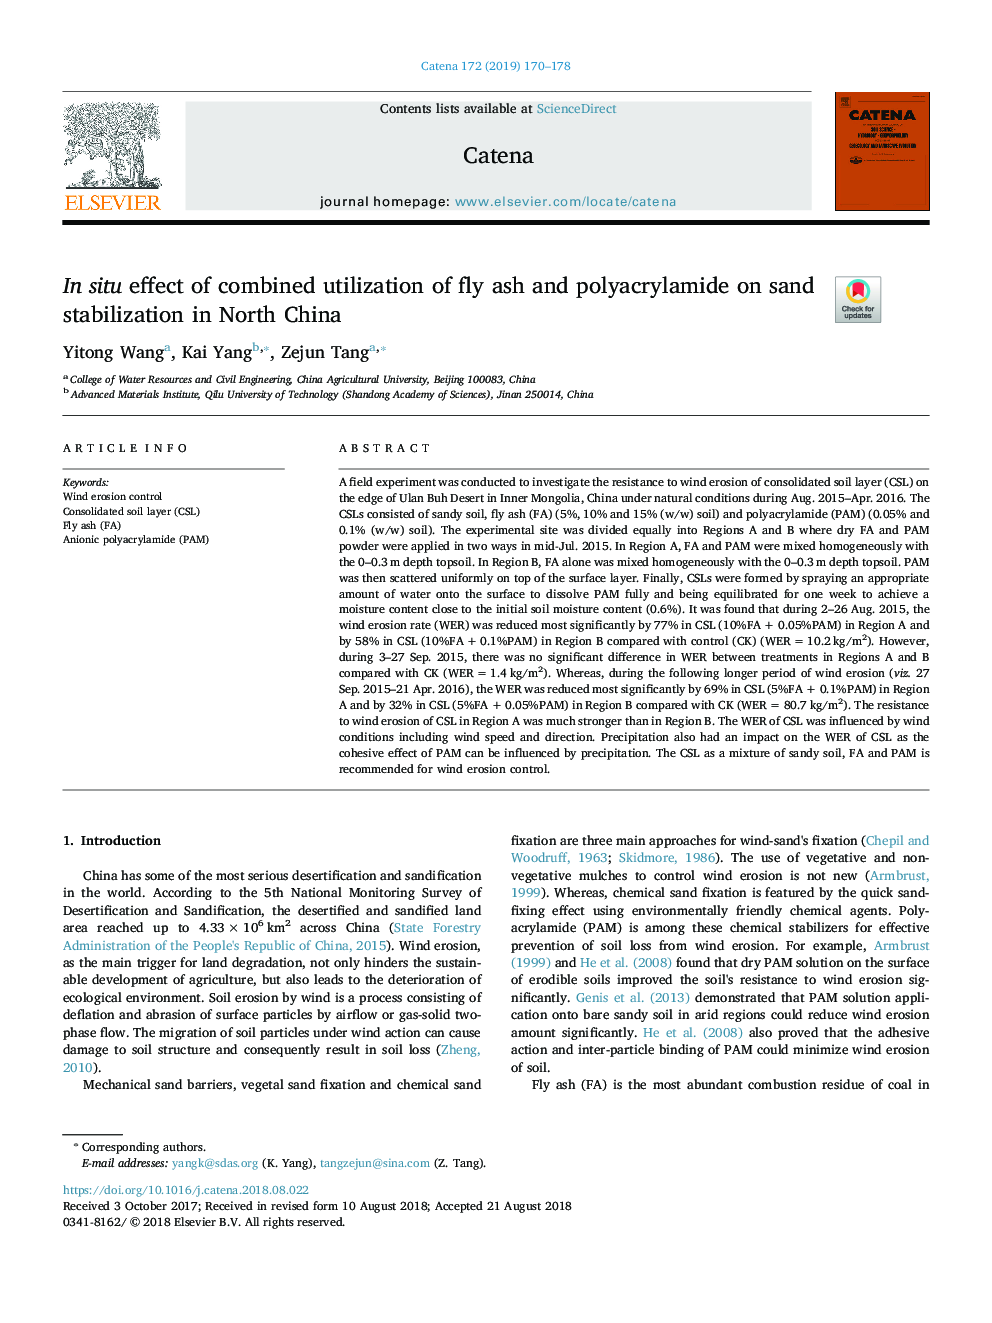 In situ effect of combined utilization of fly ash and polyacrylamide on sand stabilization in North China